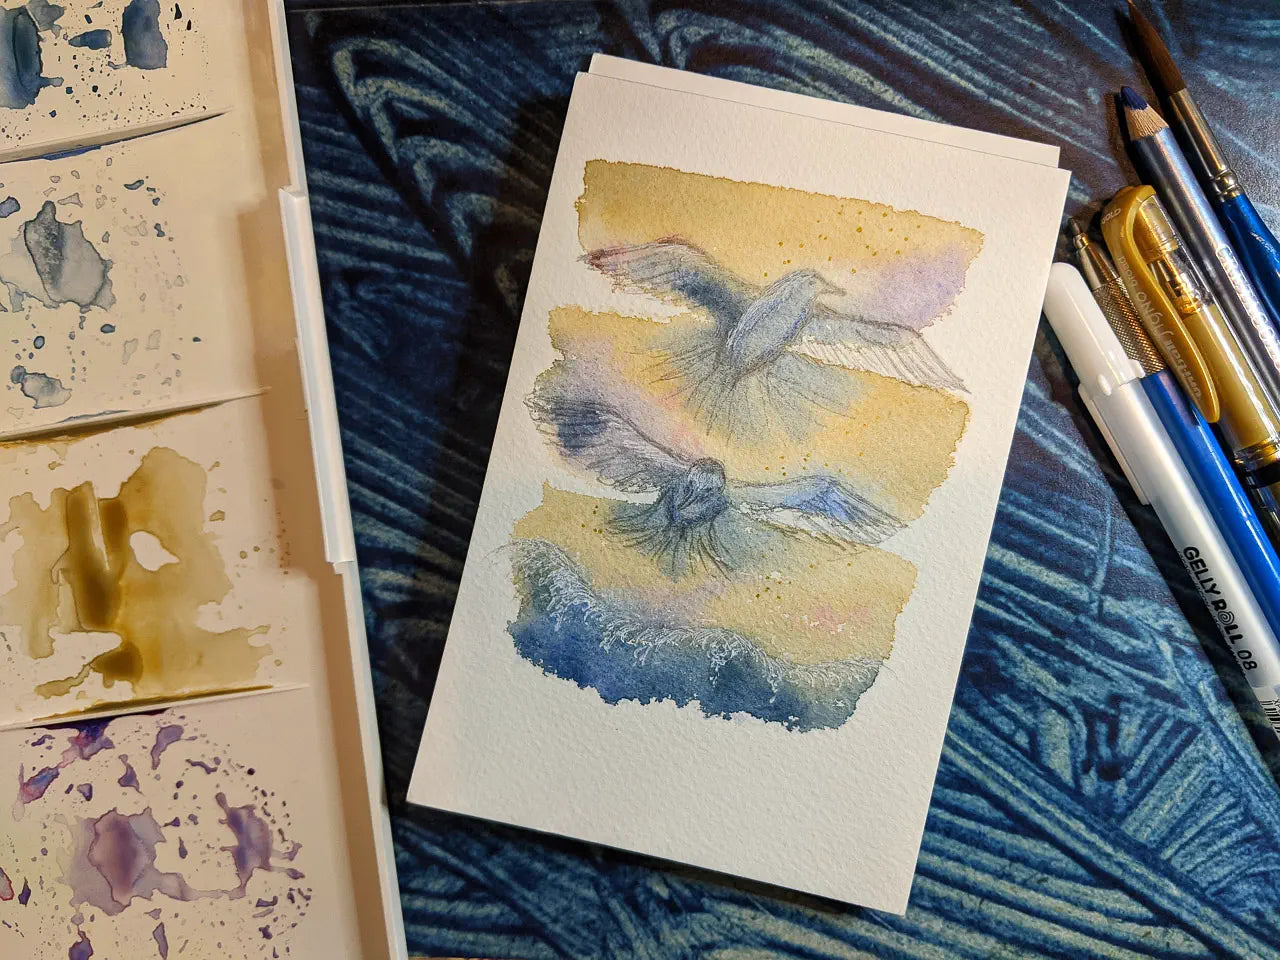 Photo of a watercolour painting of two gulls flying above a breaking wave. There are art supplies surrounding the painting.